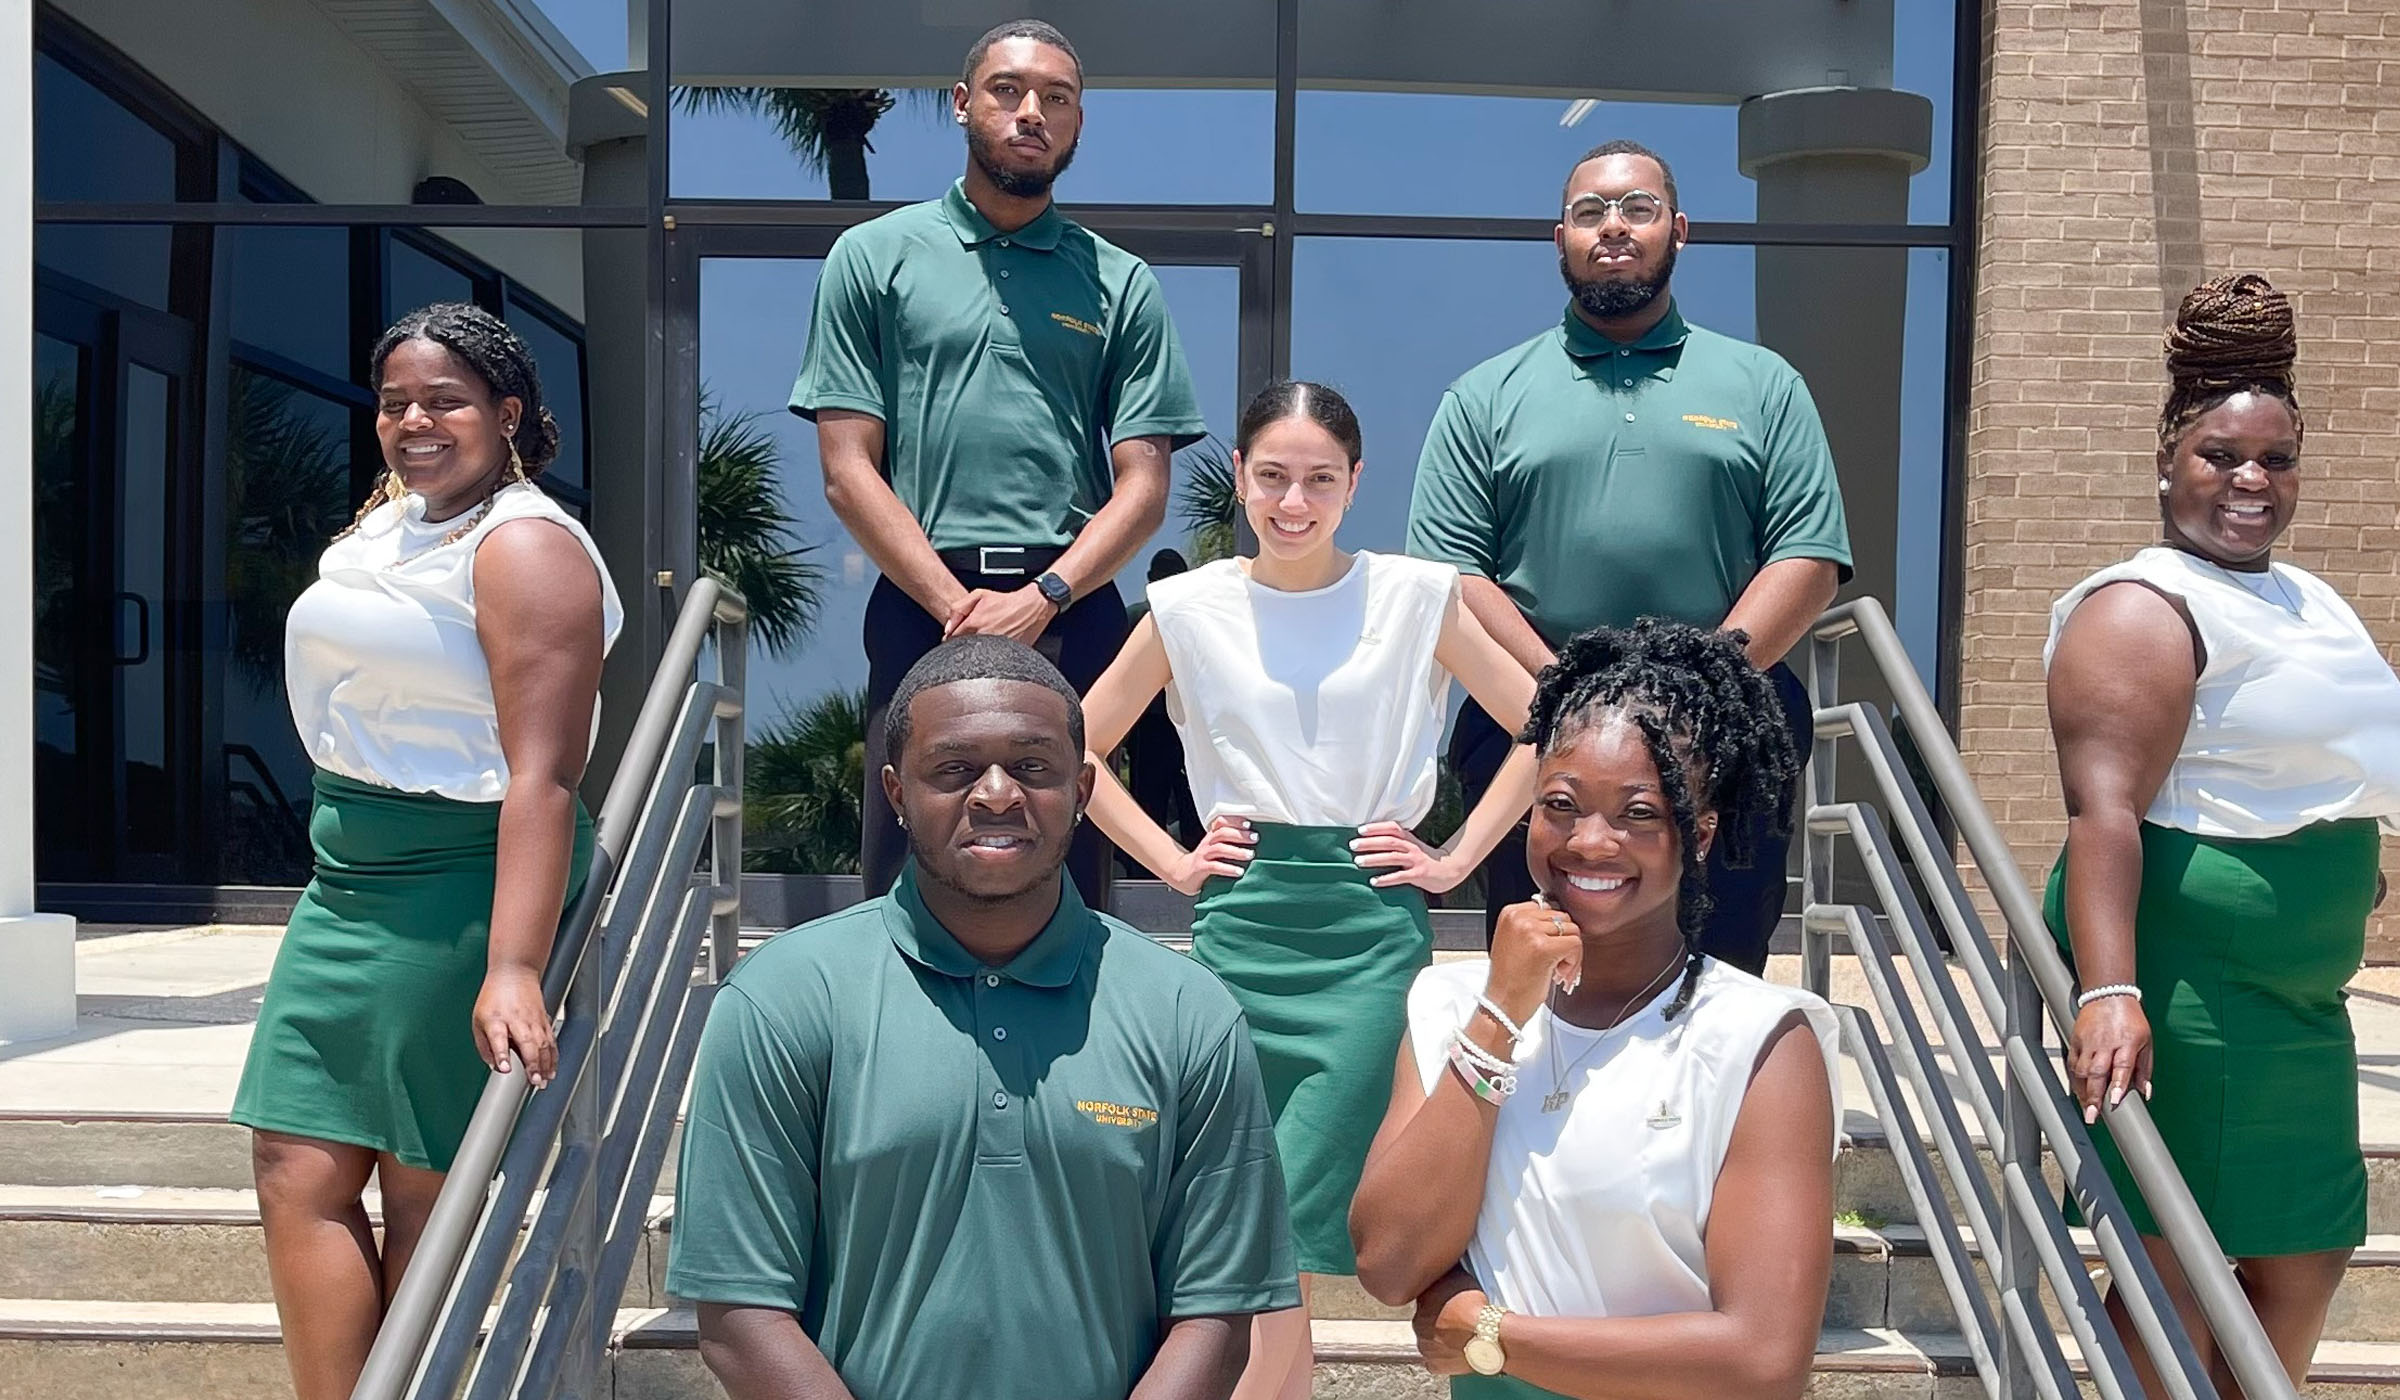 organizations-and-activities-norfolk-state-university-norfolk-state-university